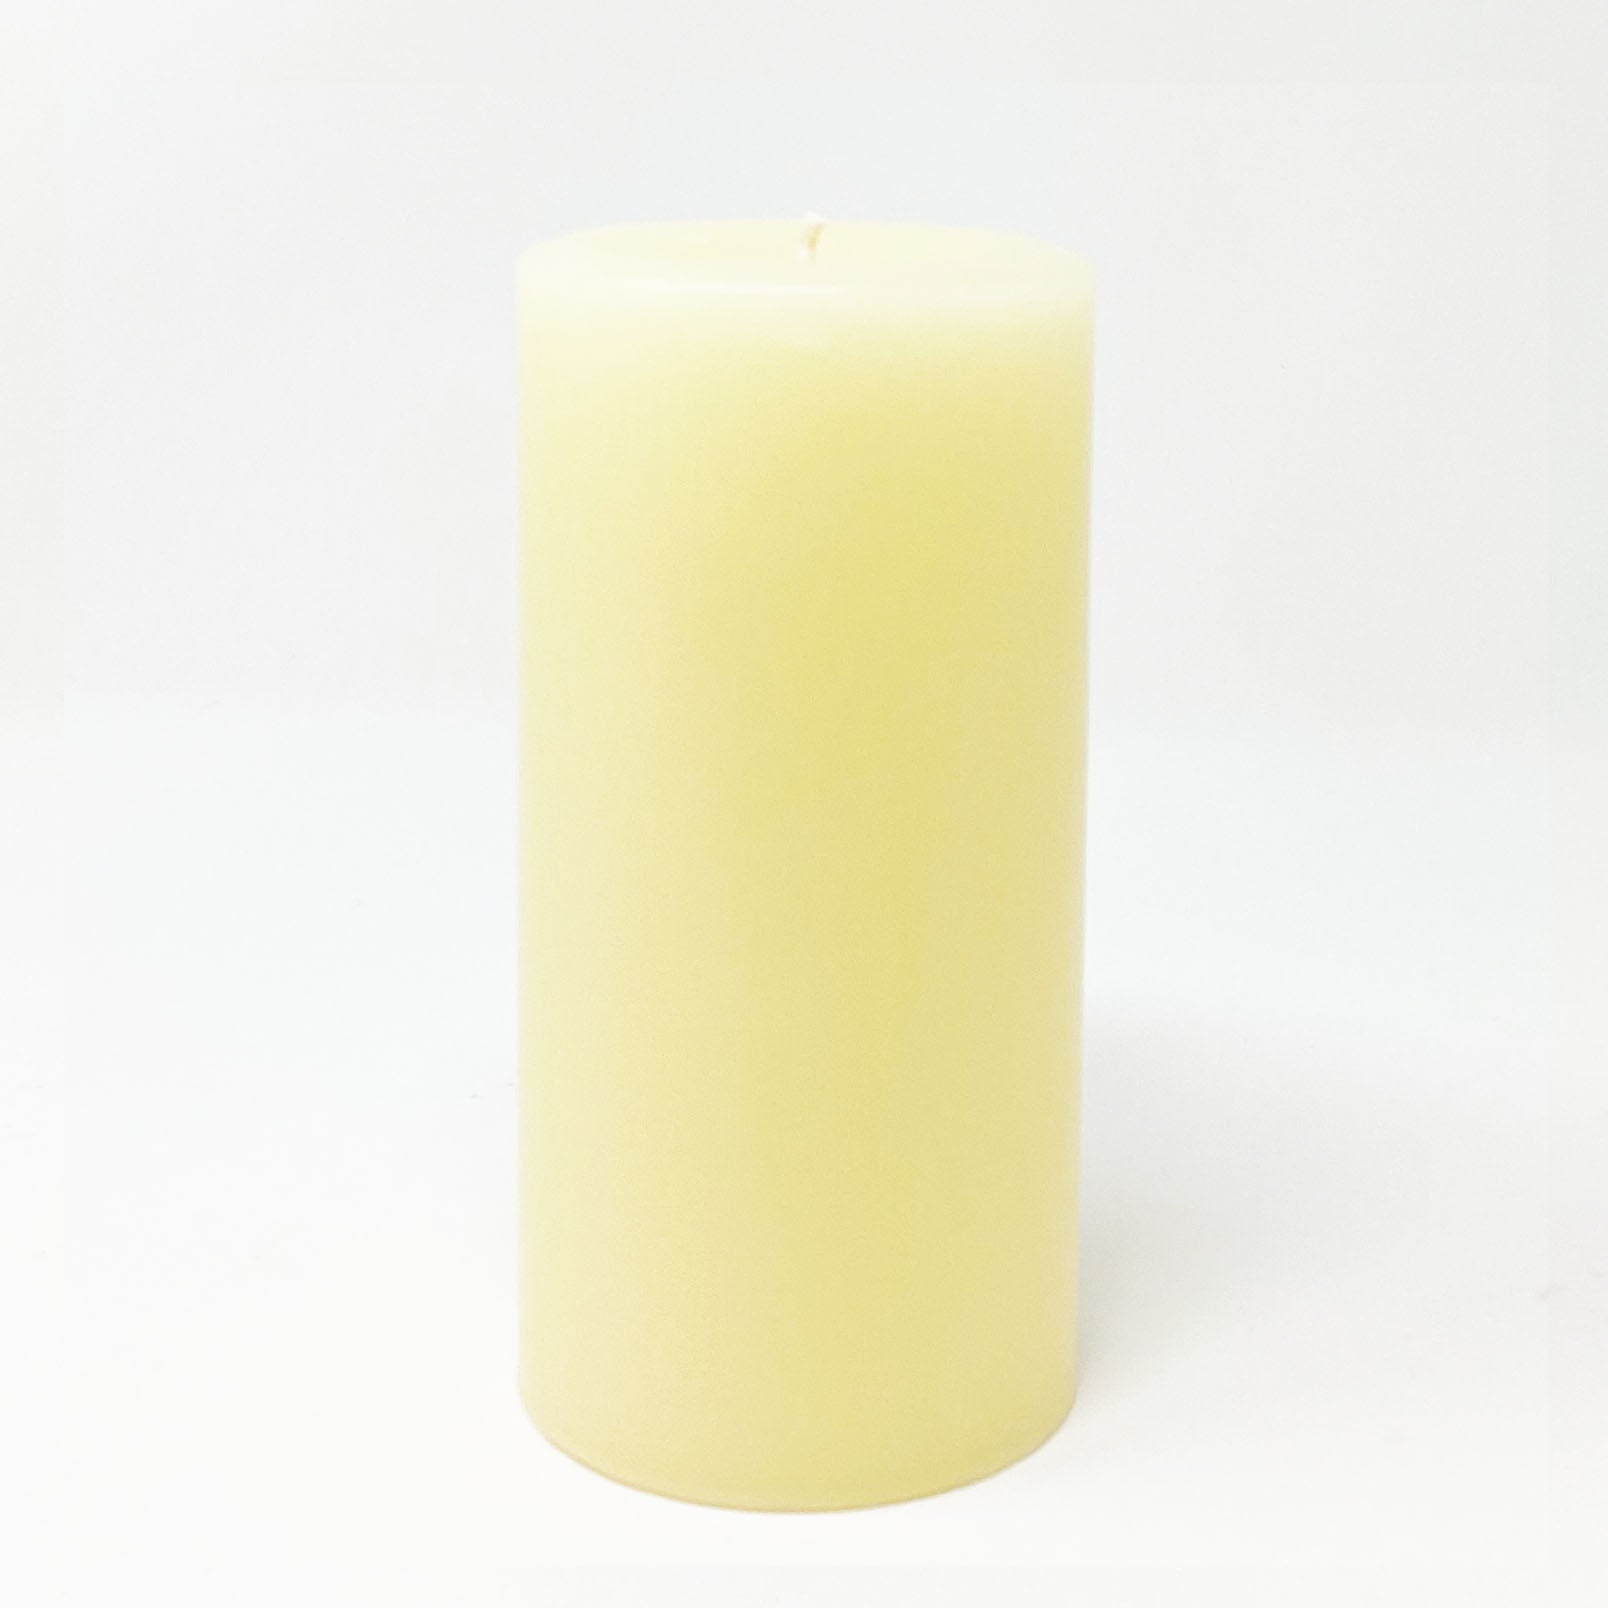 3x6" French Vanilla Scented Pillar Candle